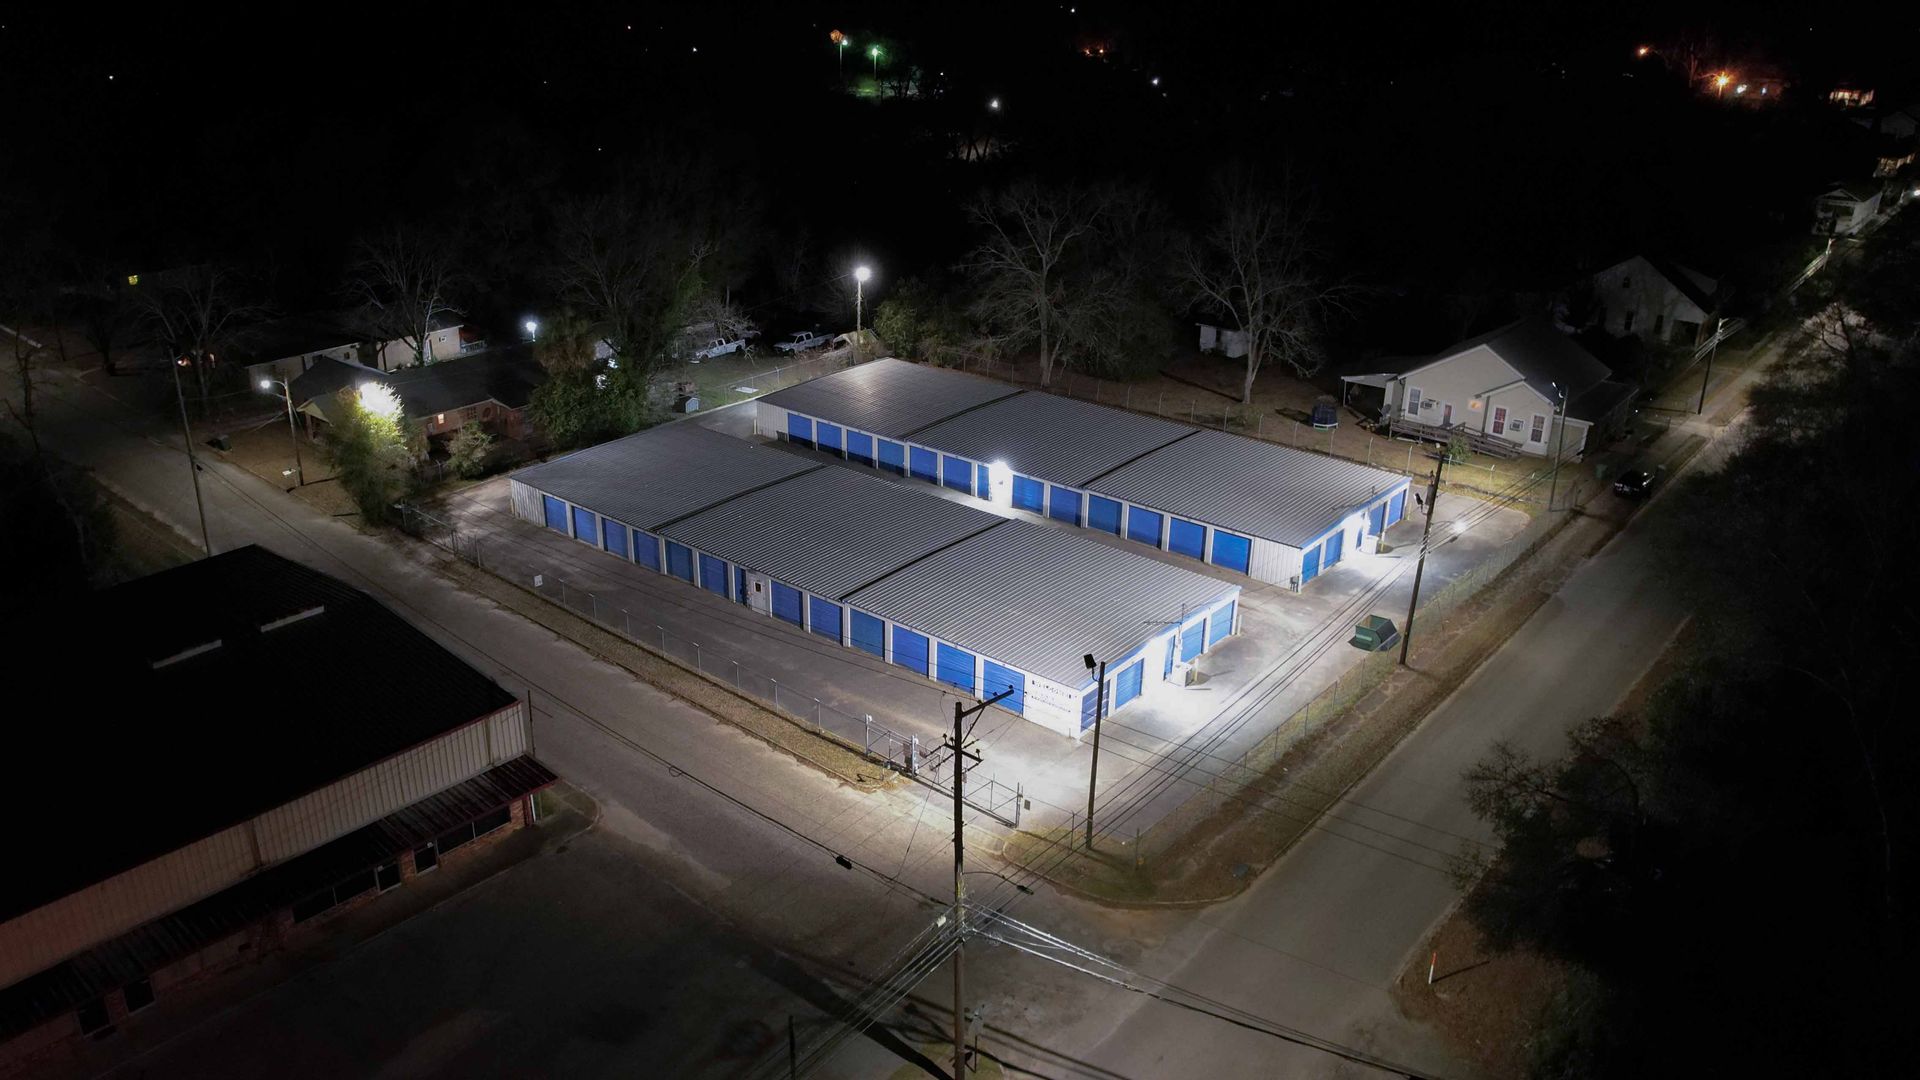 An Aerial view of an Illuminated storage facility at night 